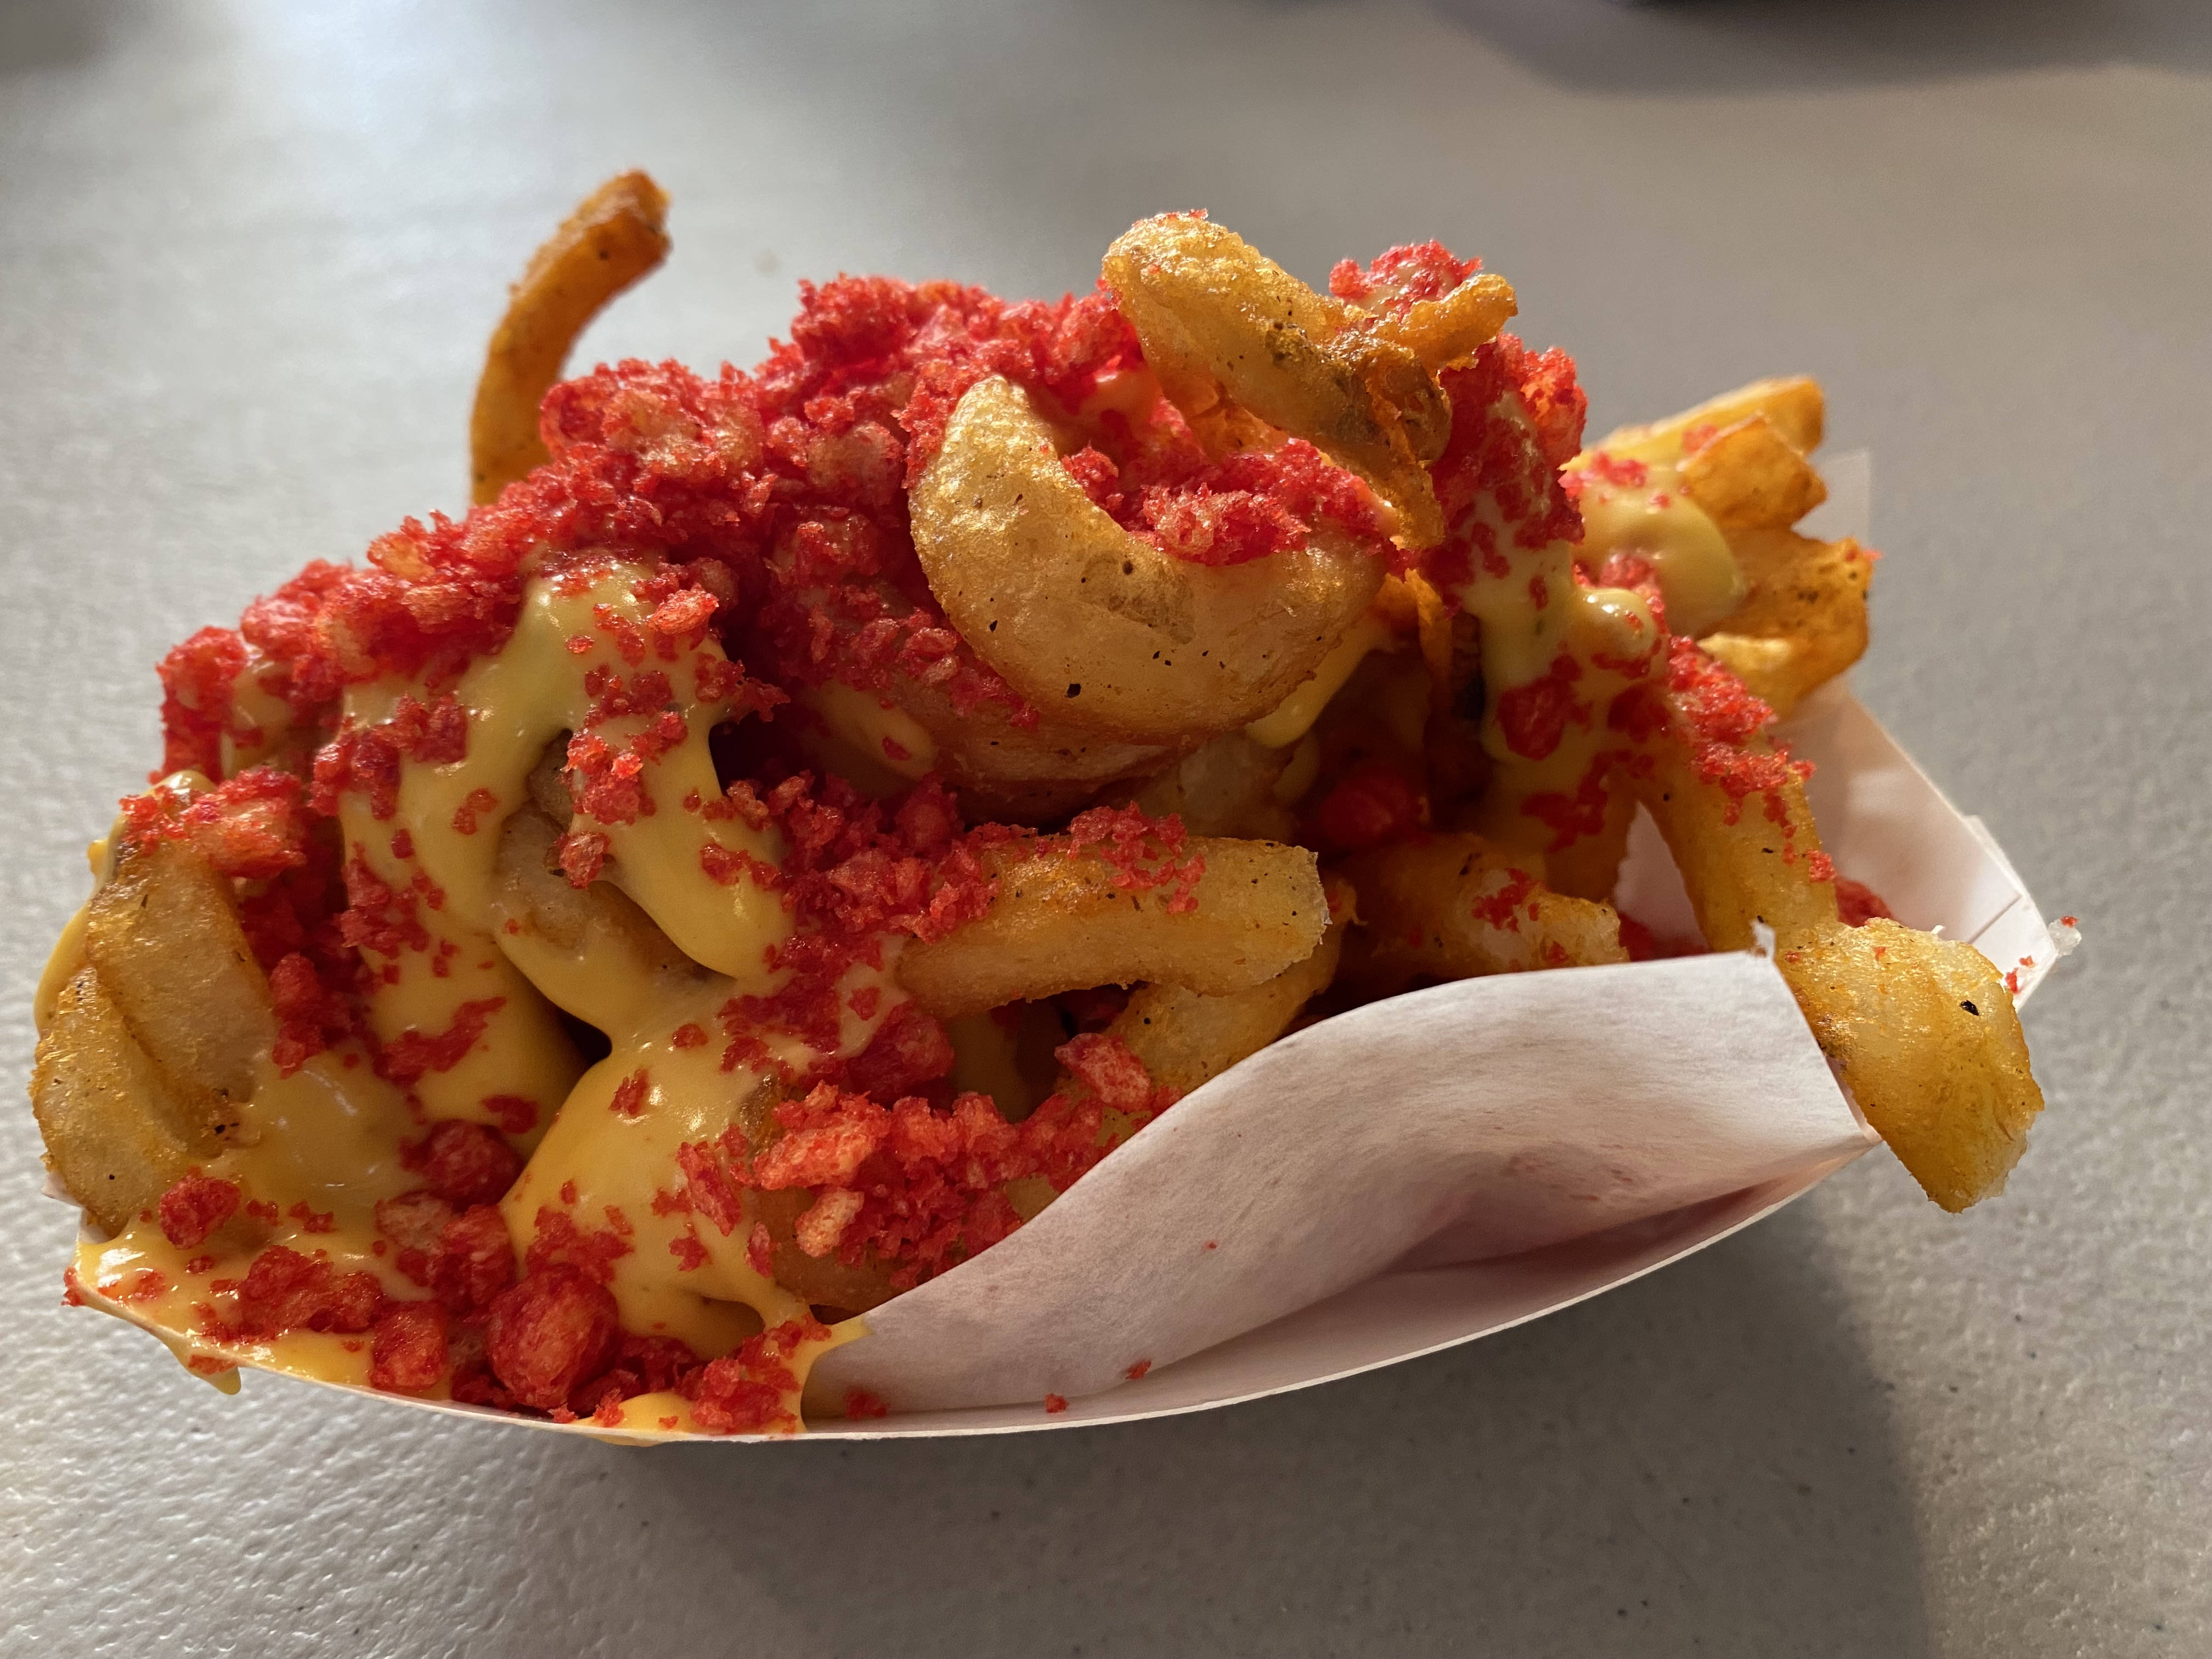 The Flamin' Hot Curly Fries at the Country Corner in The Eatery building a new item at the New York State Fair this year. They are sprinkled with crushed Cheetoh's.
Photo by Mike Waters | mwaters@syracuse.com